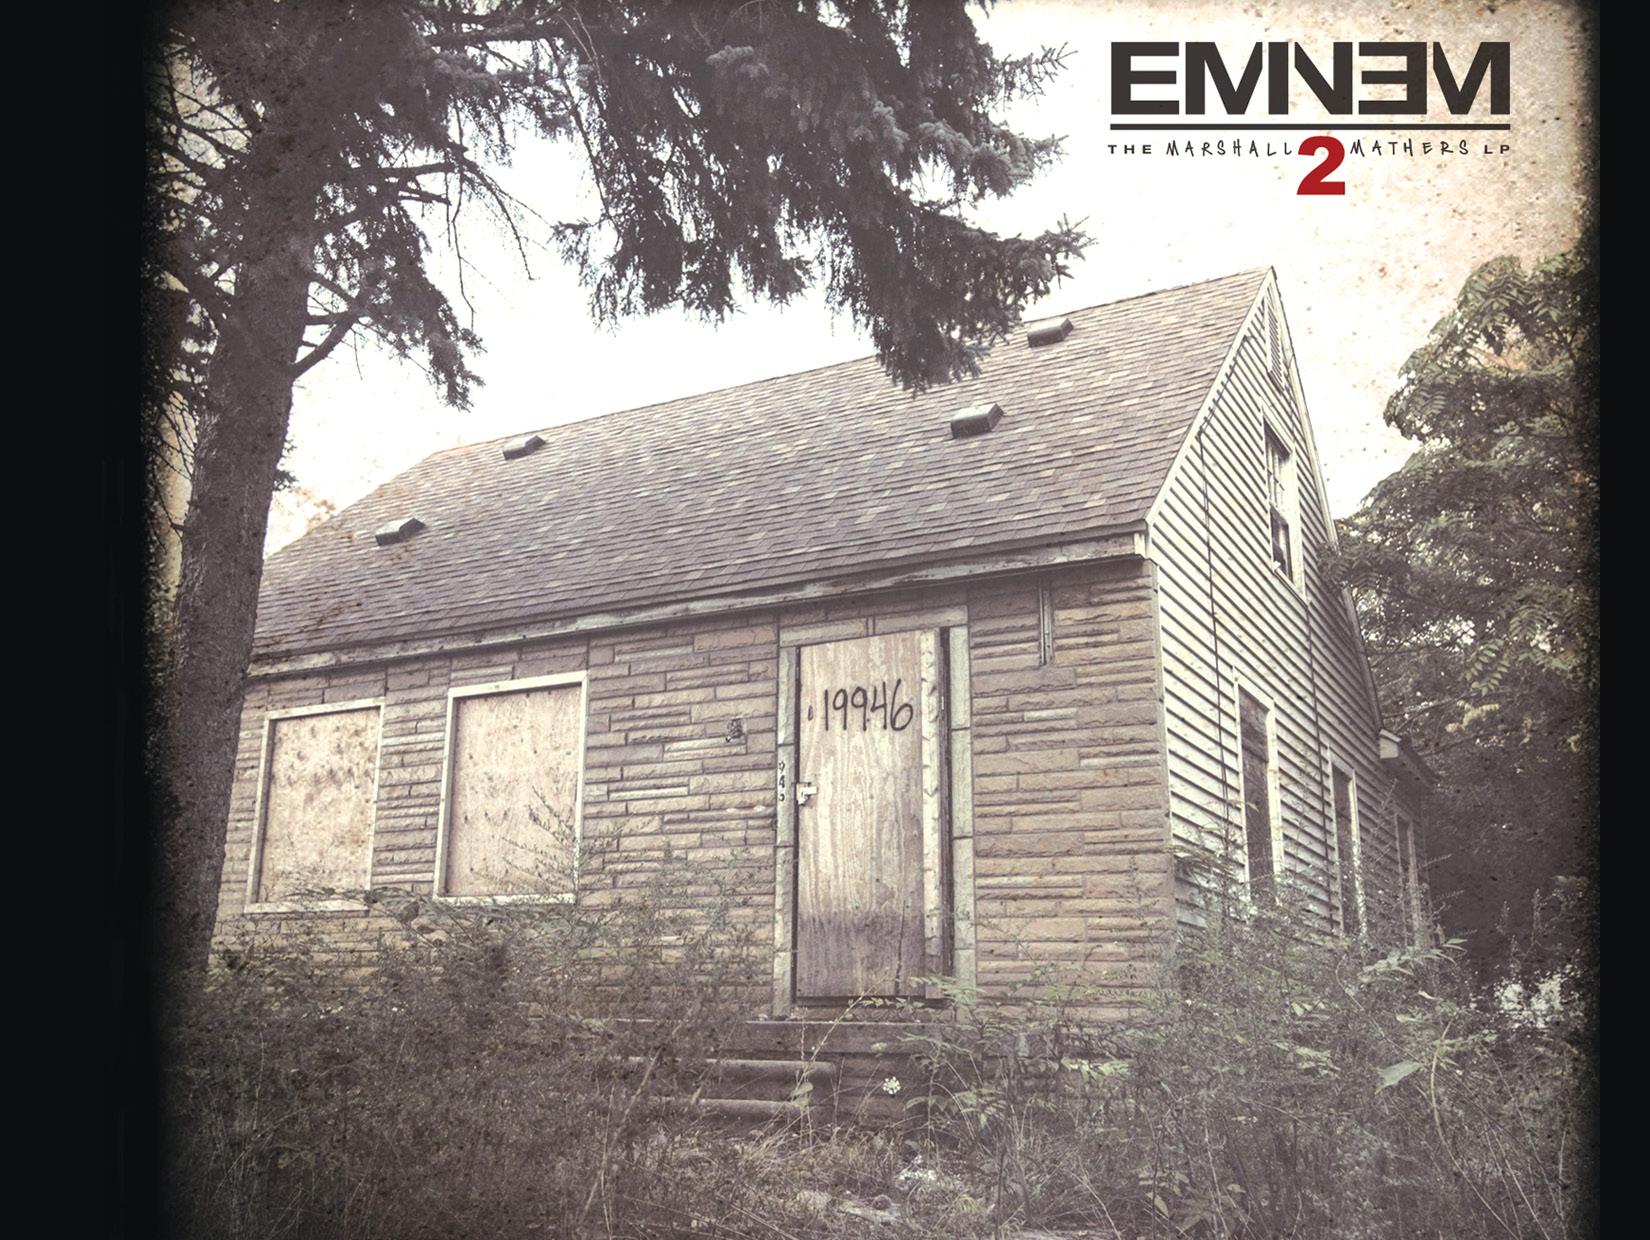 Eminem – 'Marshall Mathers LP 2' (Booklet & Production Credits) | HipHop-N-More - Part 21650 x 1240